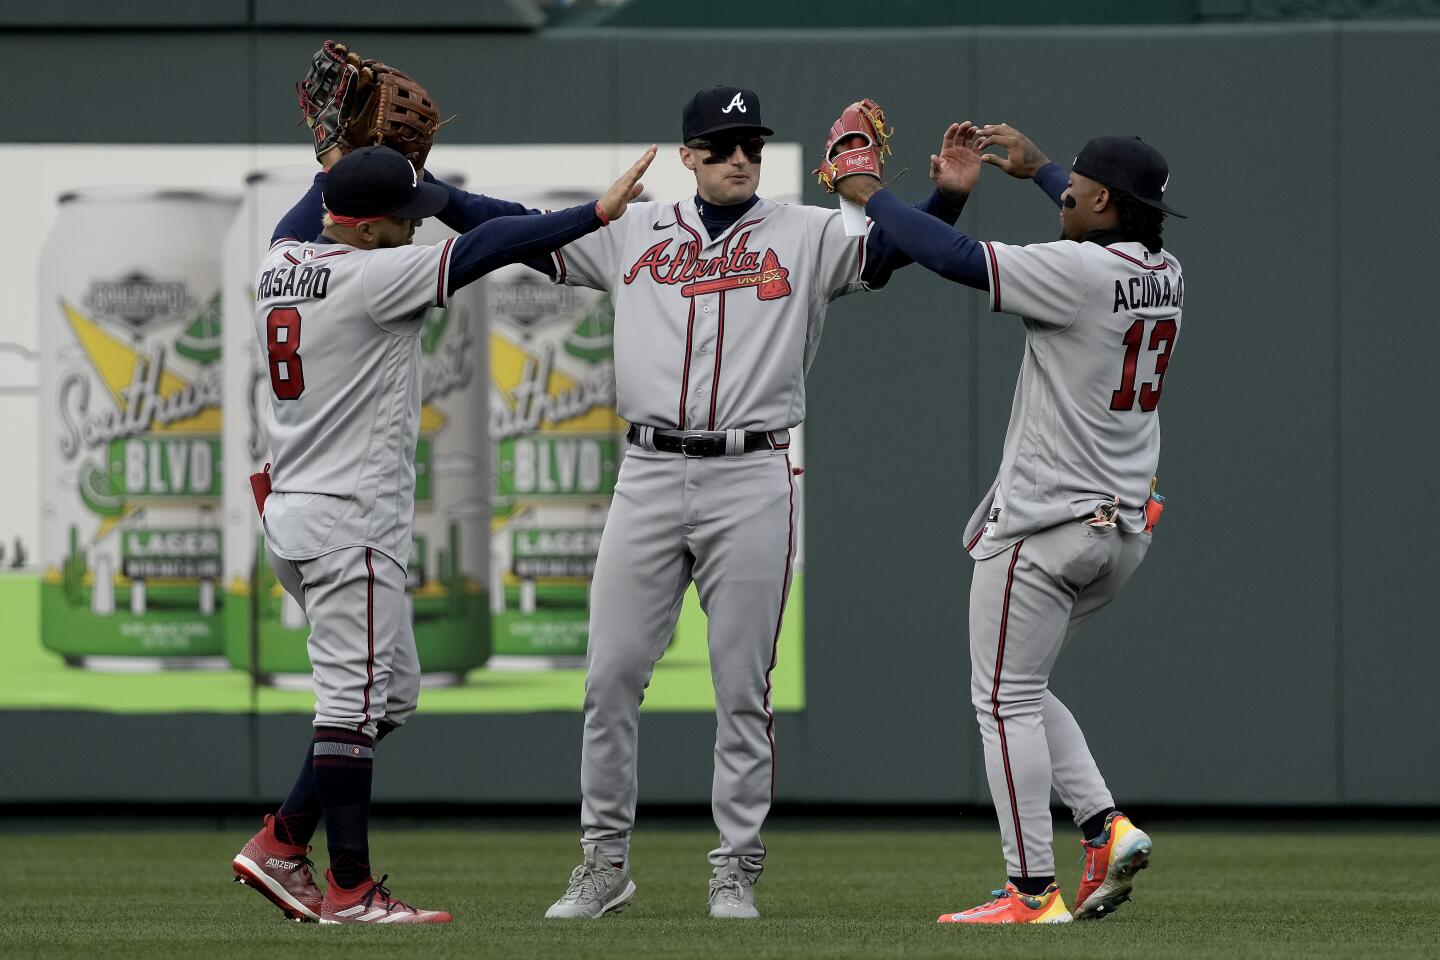 Atlanta Braves: Previewing the Braves' schedule in April